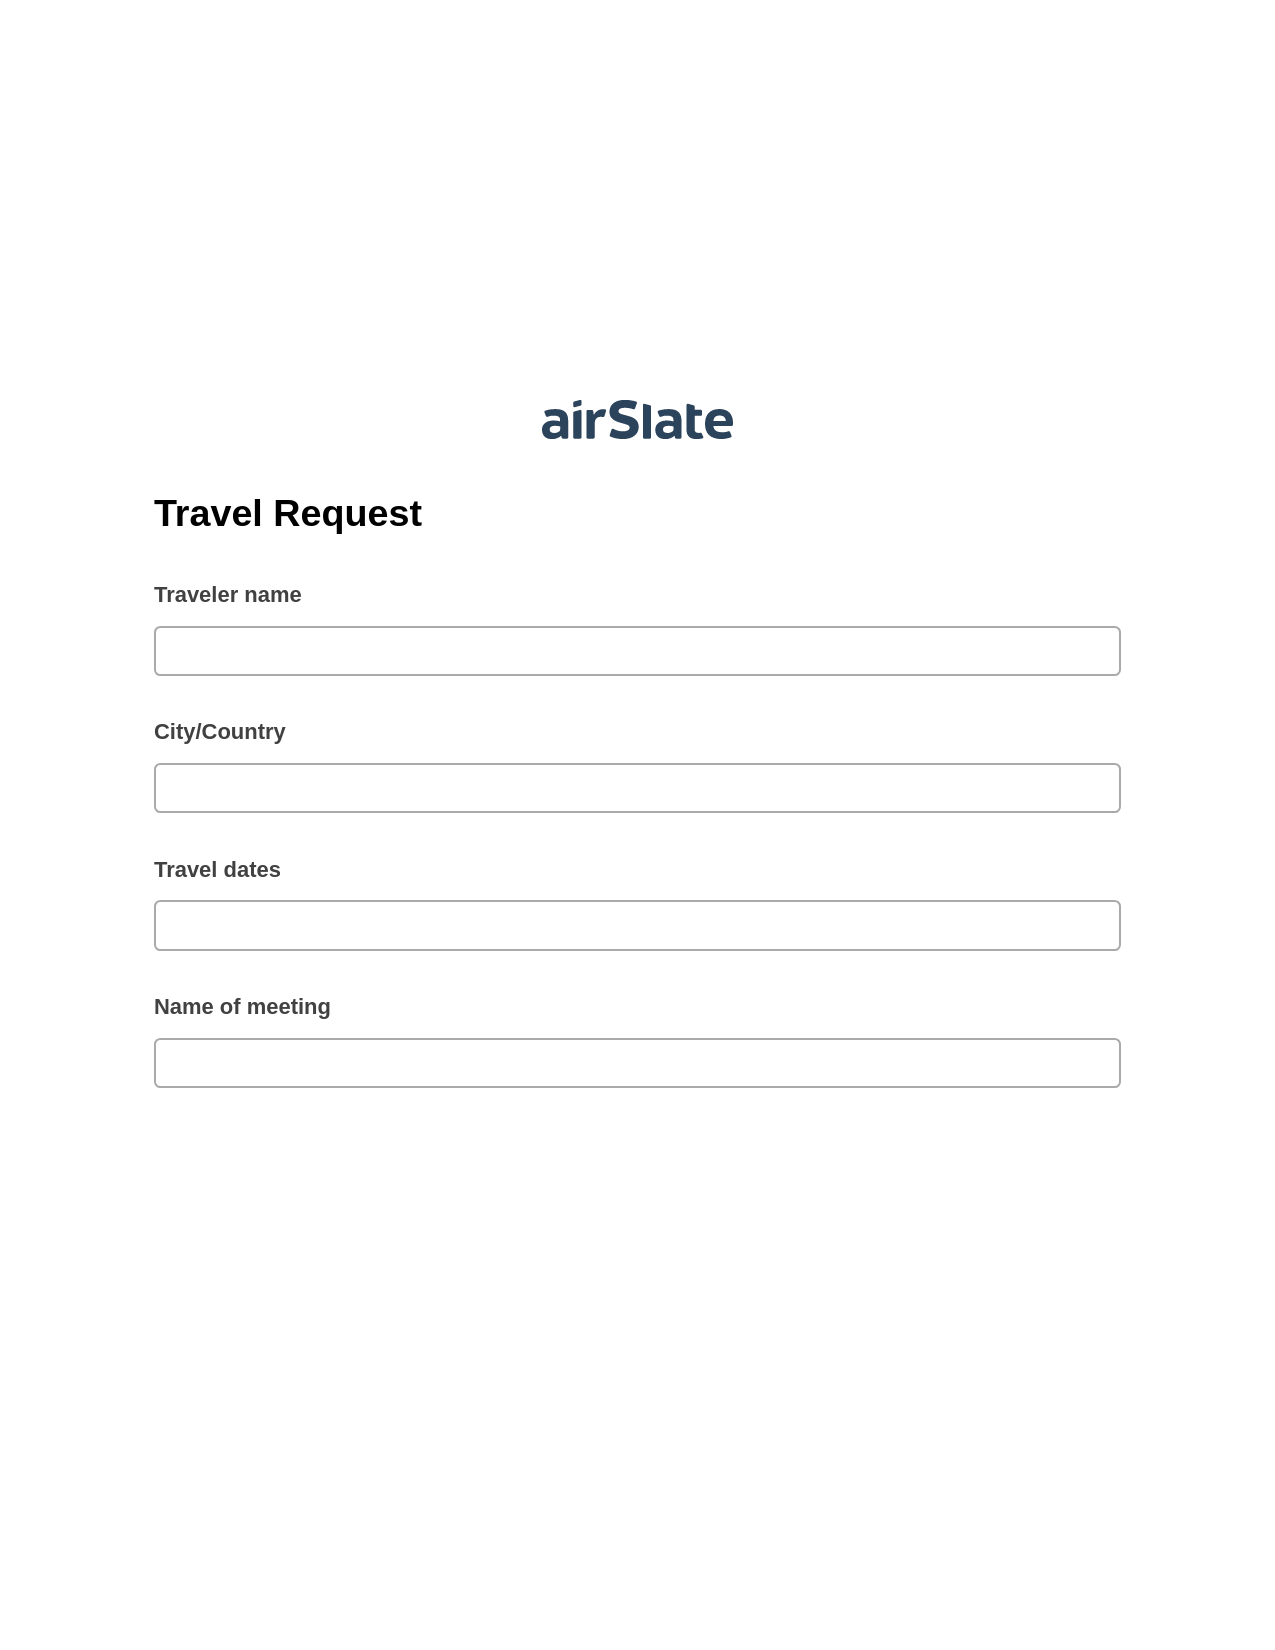 Travel Request Pre-fill Slate from MS Dynamics 365 Records Bot, Create Slate Reminder Bot, Box Bot